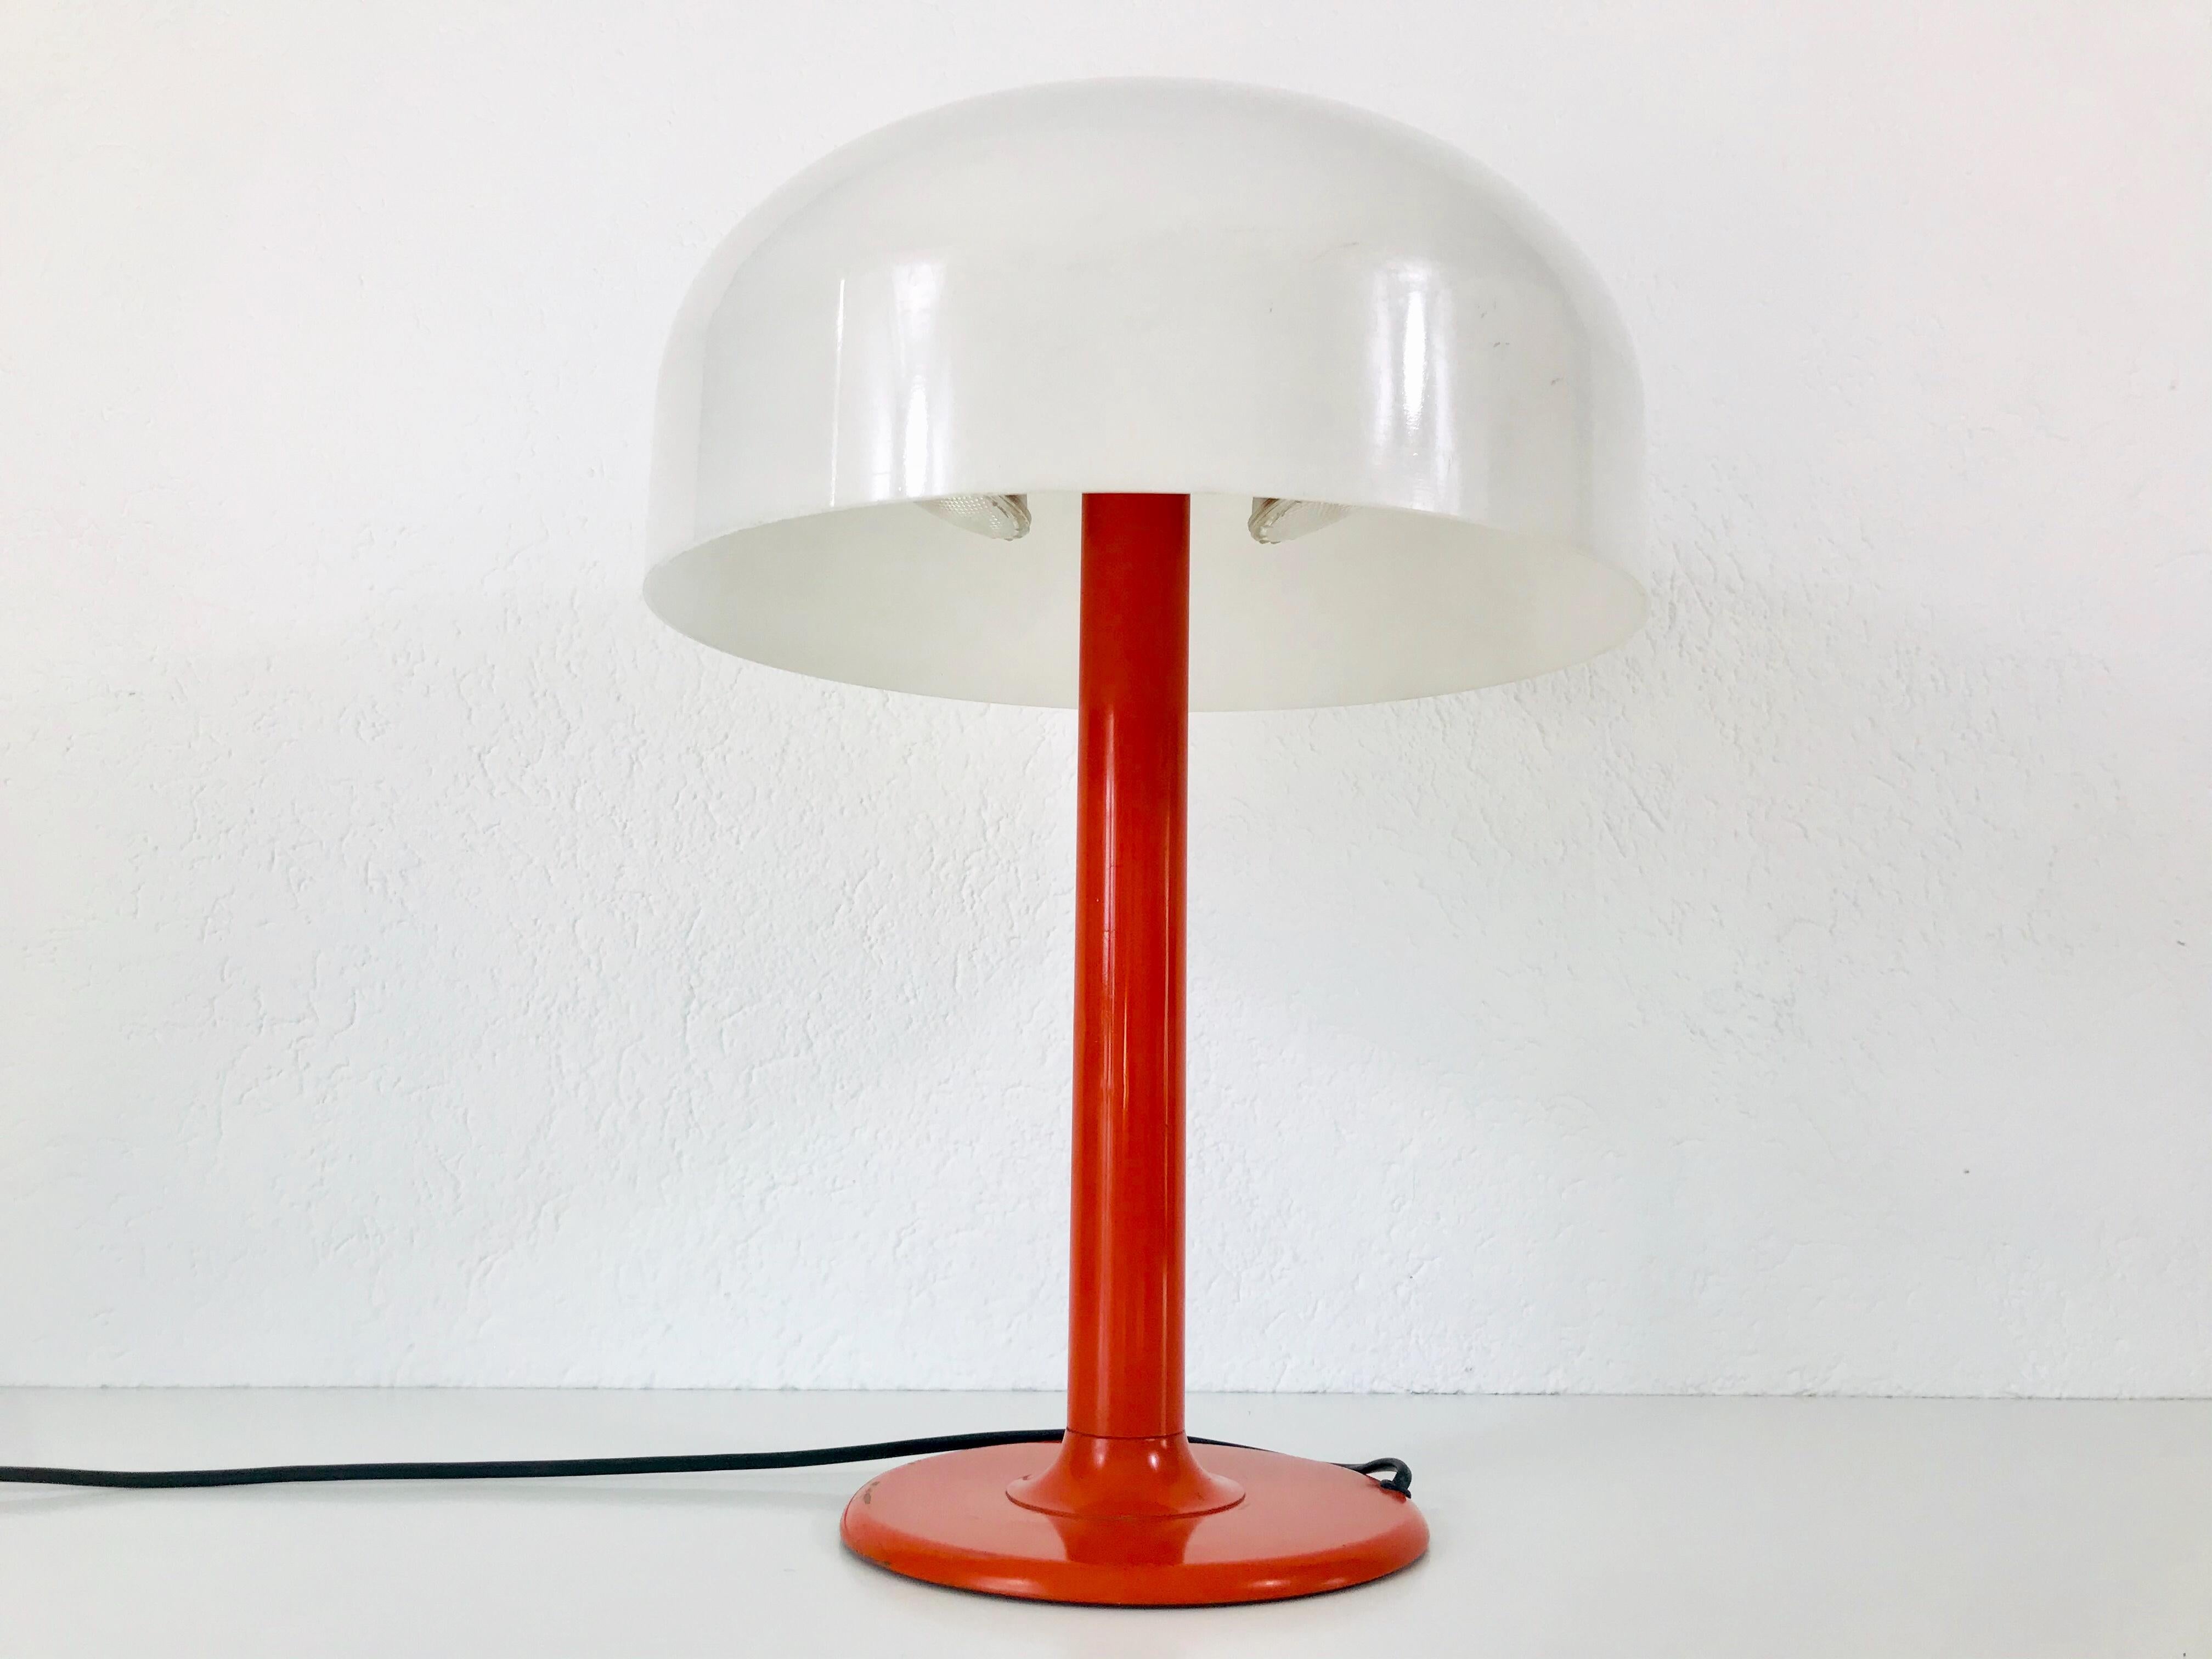 A table lamp in mushroom shape made in the 1970s. It is similar to the table lamps designed by Verner Panton.